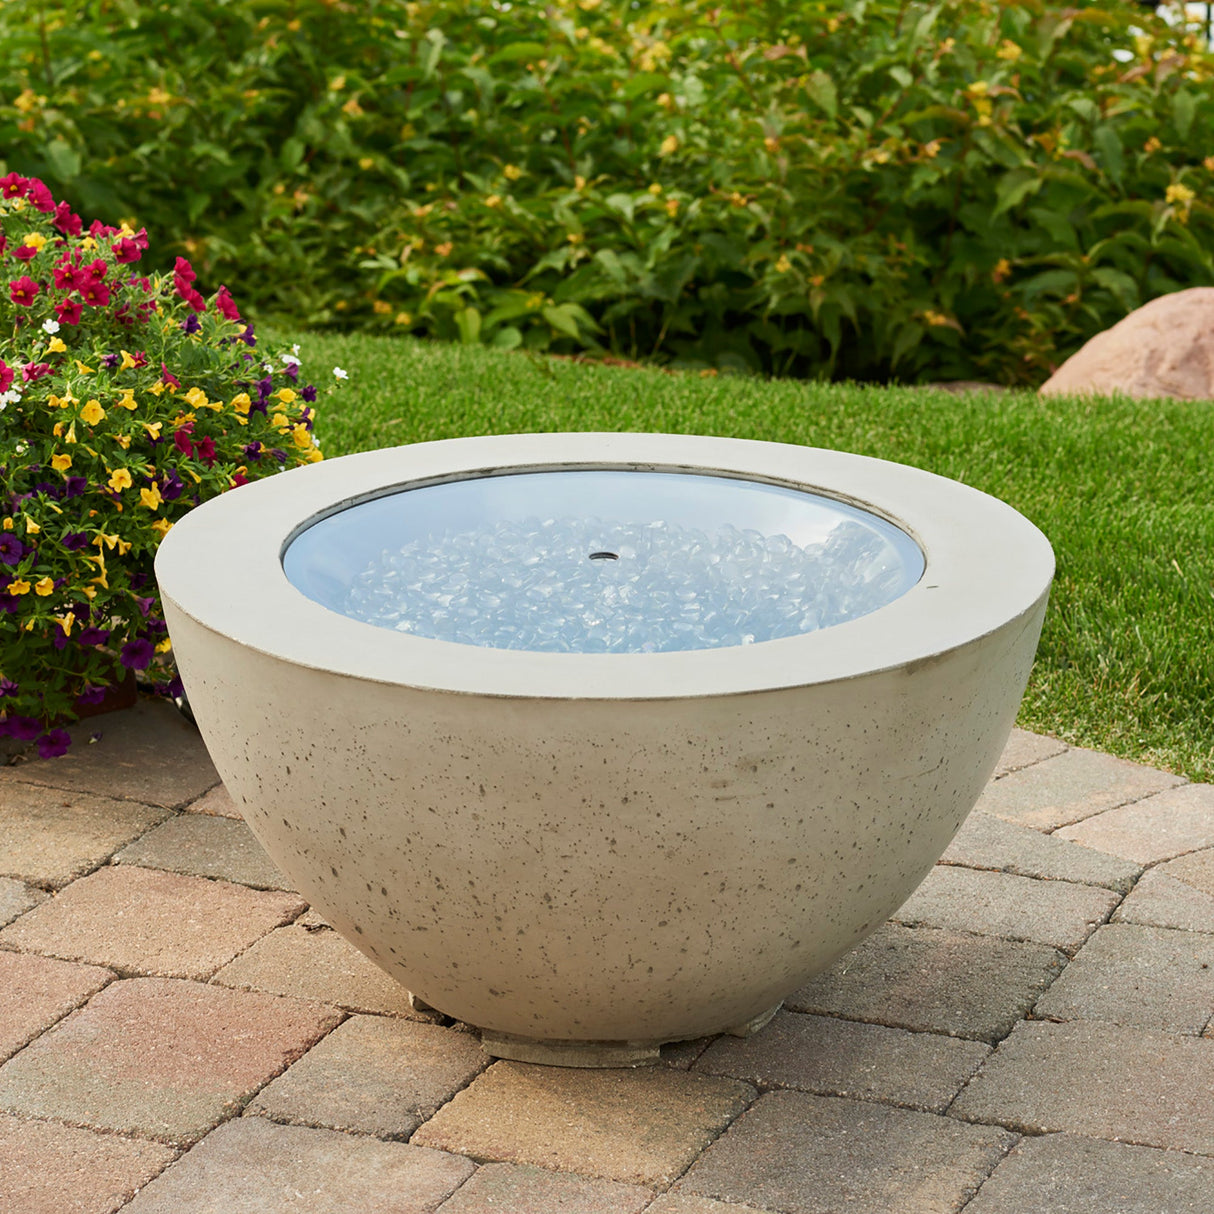 The 20" Round Glass Burner Cover on a Cove Fire Pit Bowl